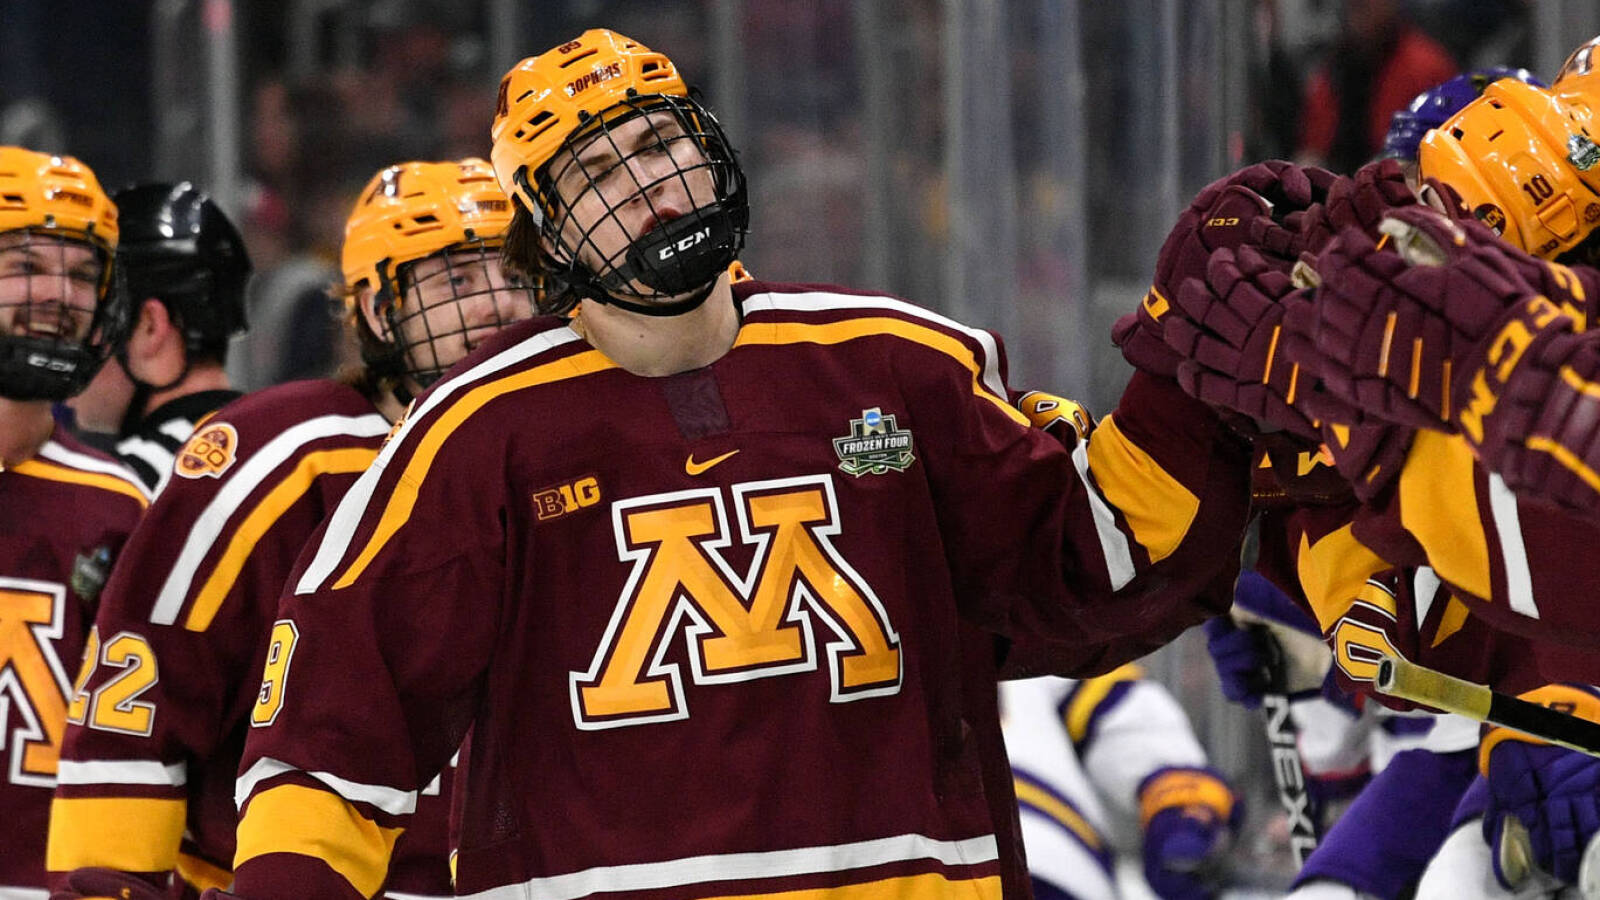 Buccigross on Knies playing in Frozen Four with Minnesota and why